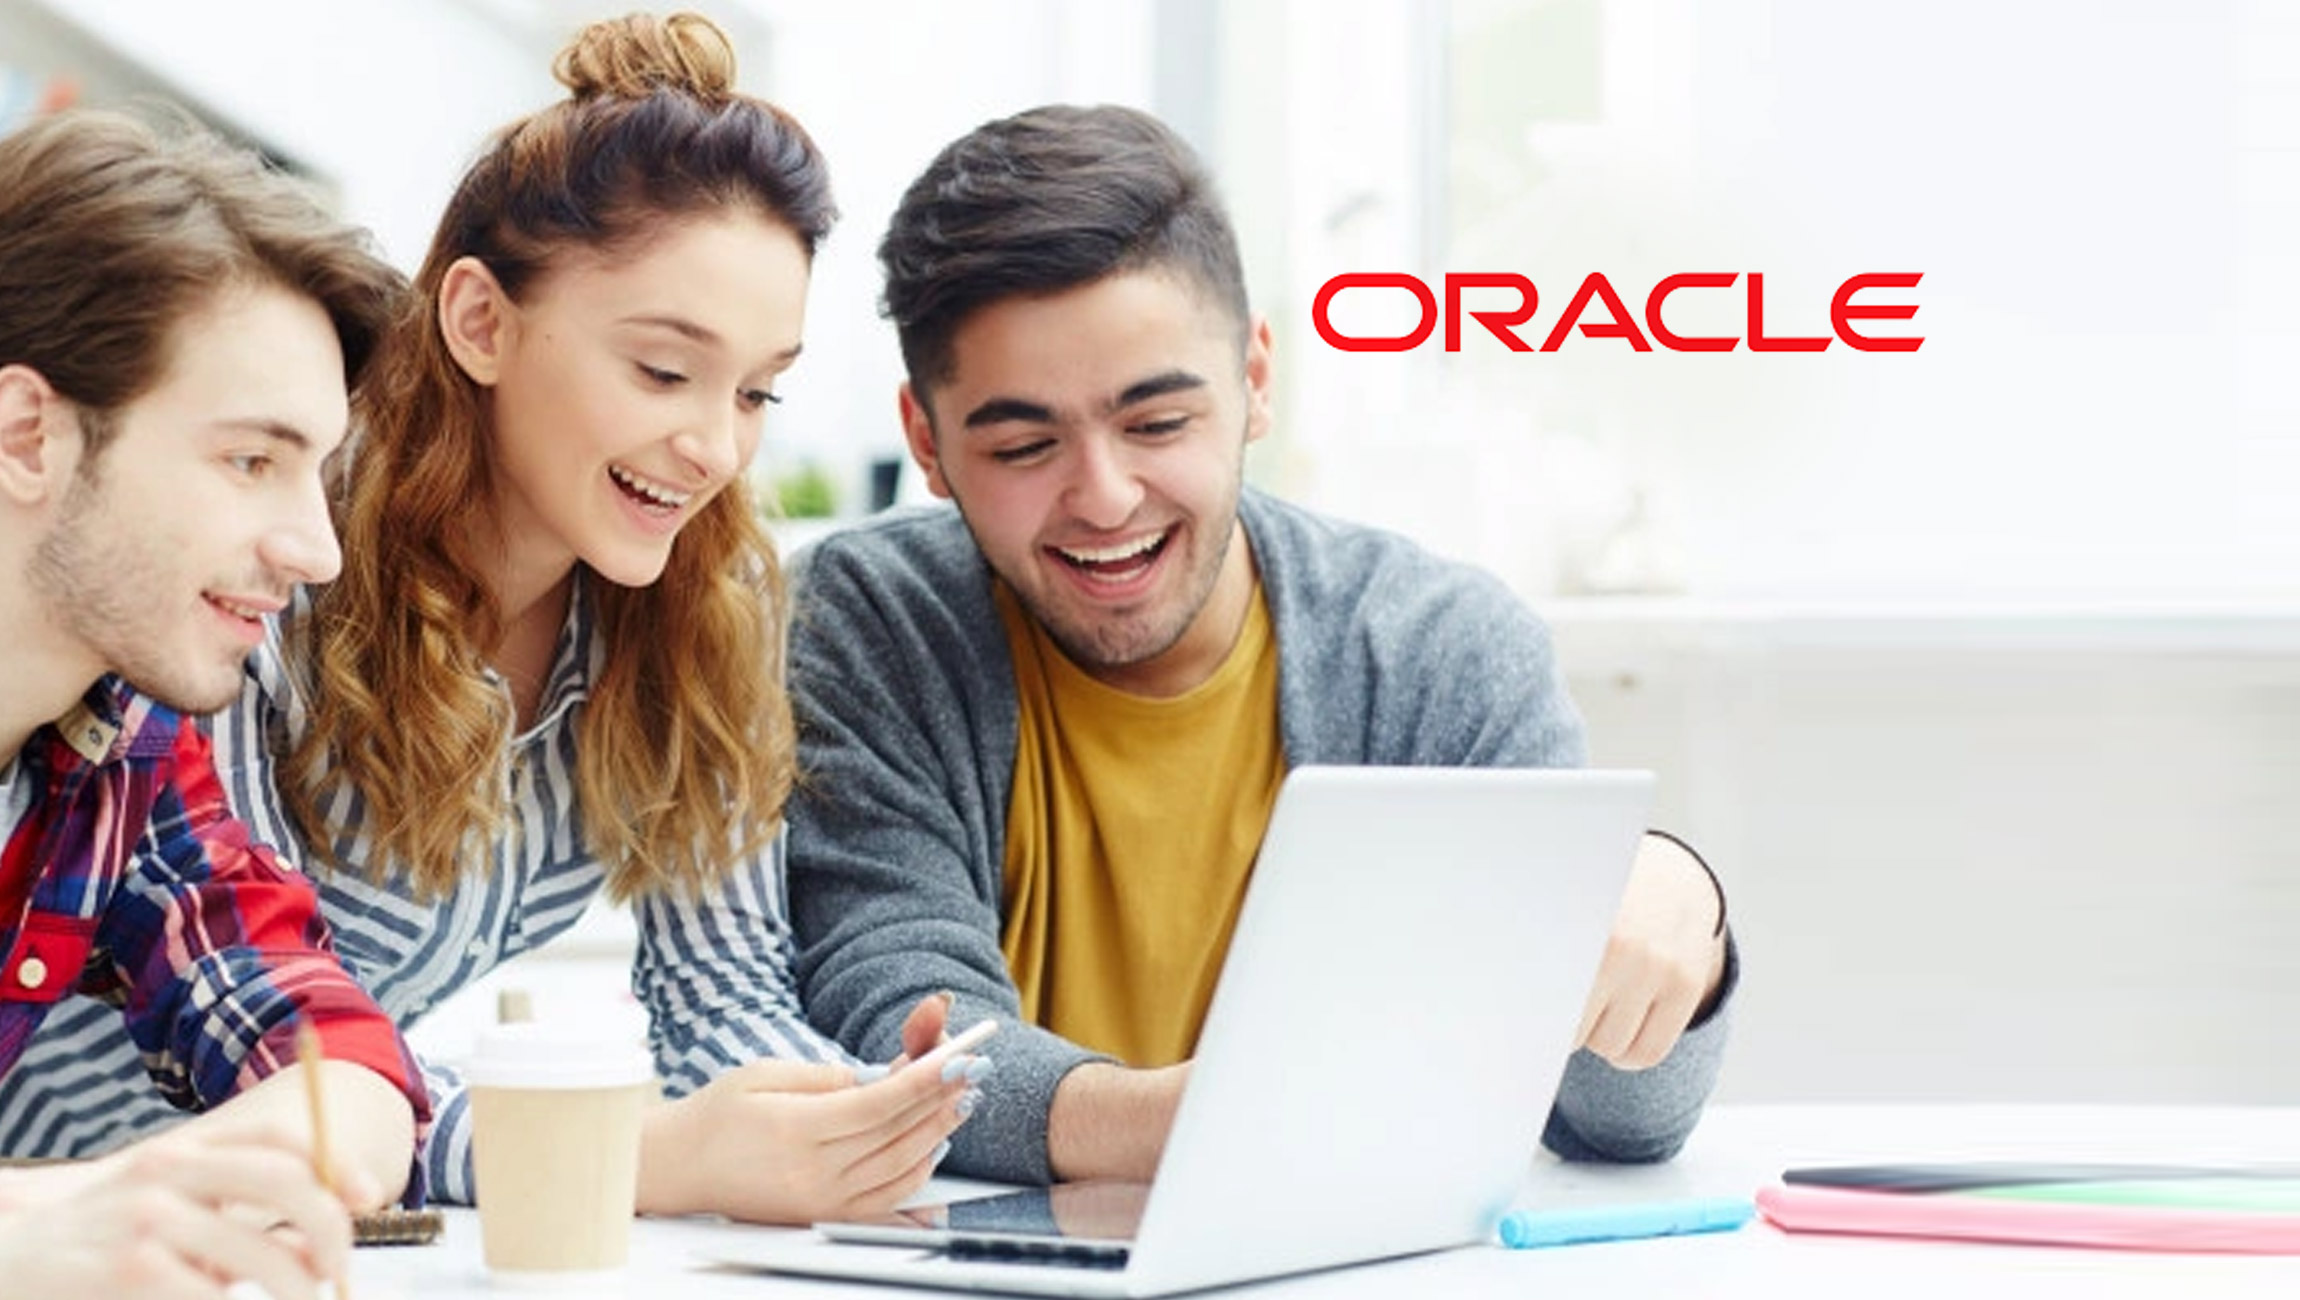 Get Free Oracle 1Z0-1057-22 Exam Questions From DumpsCompany